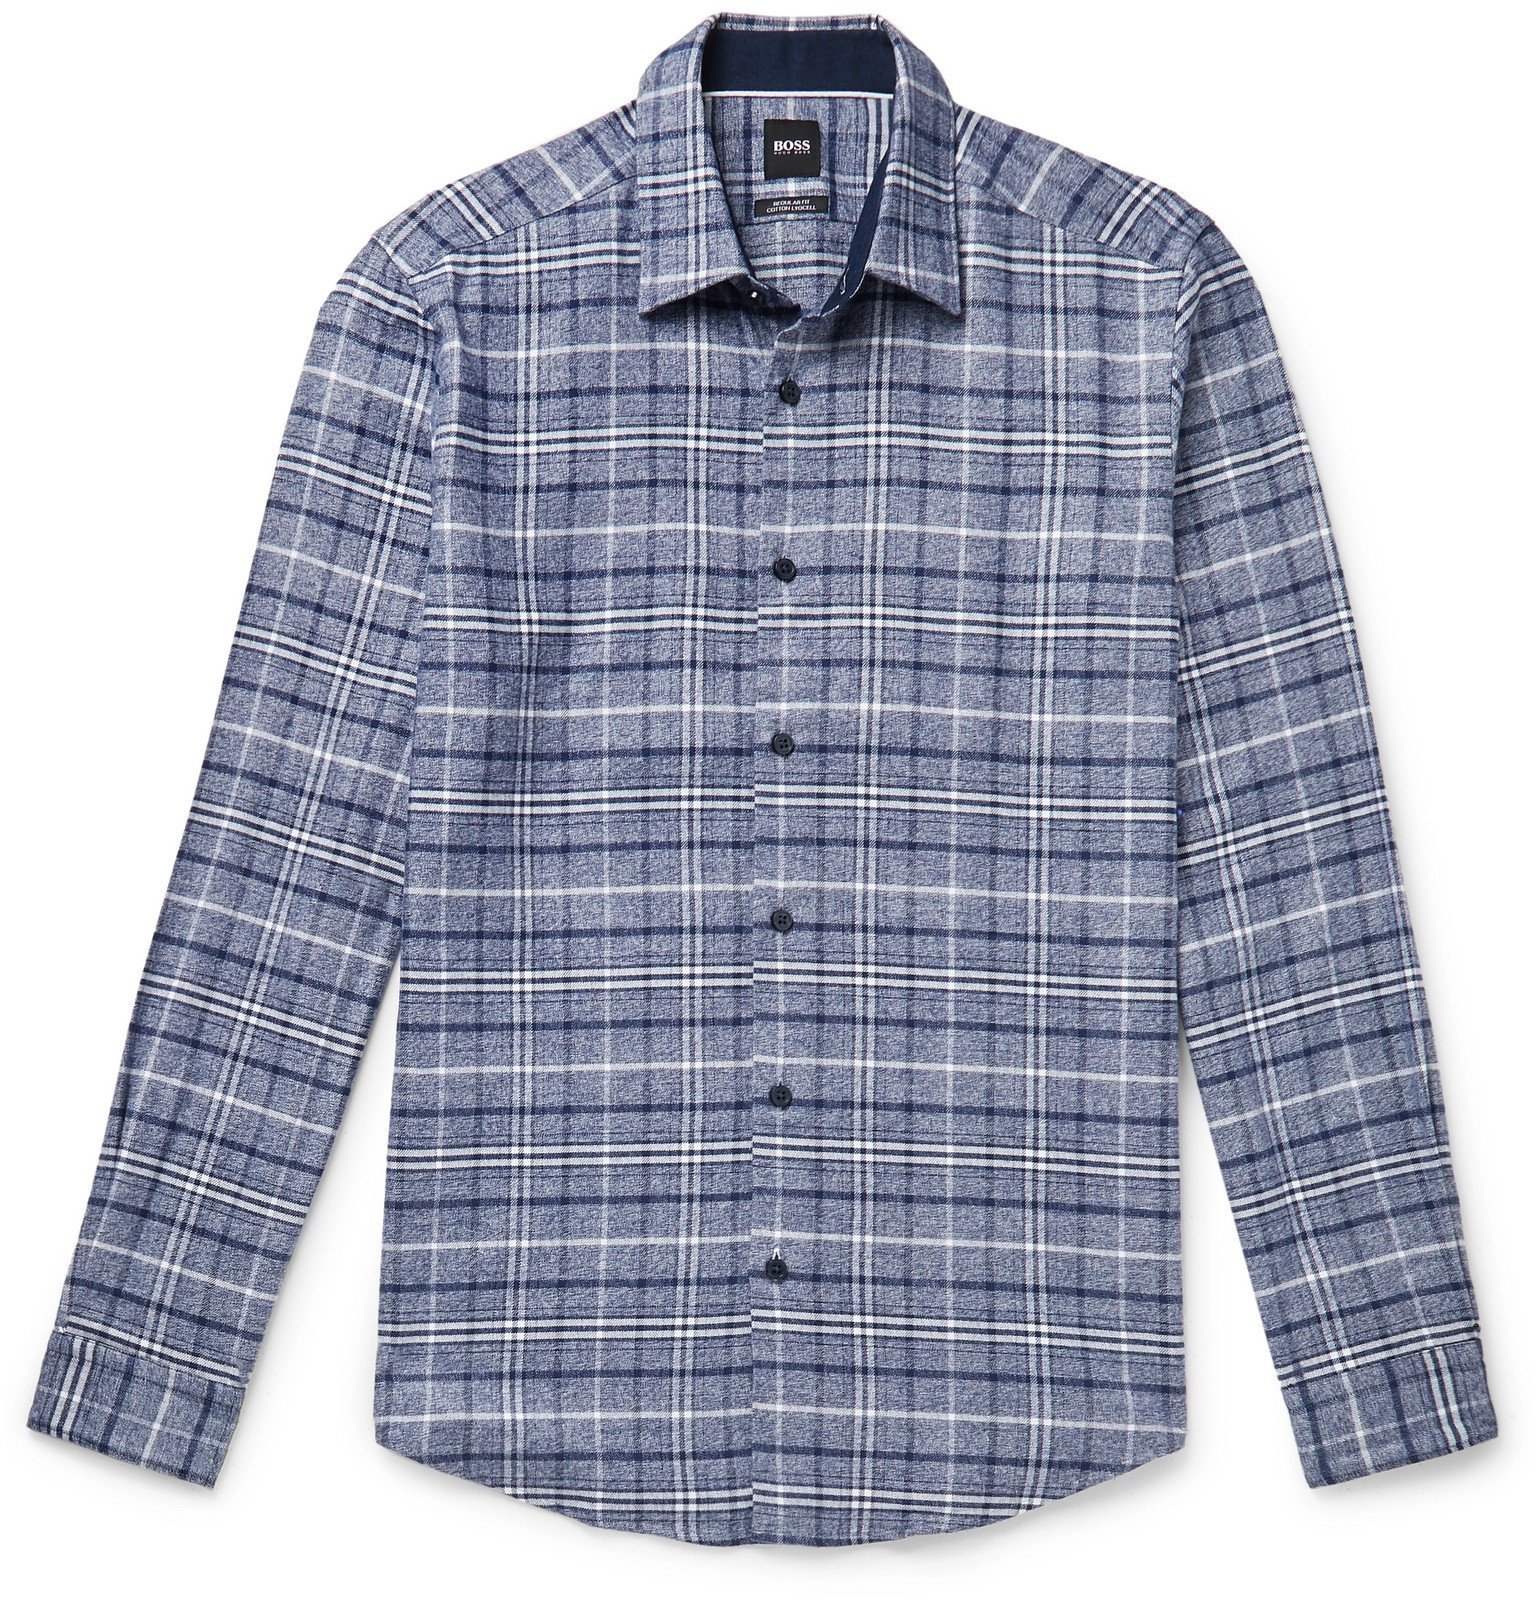 Hugo Boss - Checked Cotton and Lyocell 